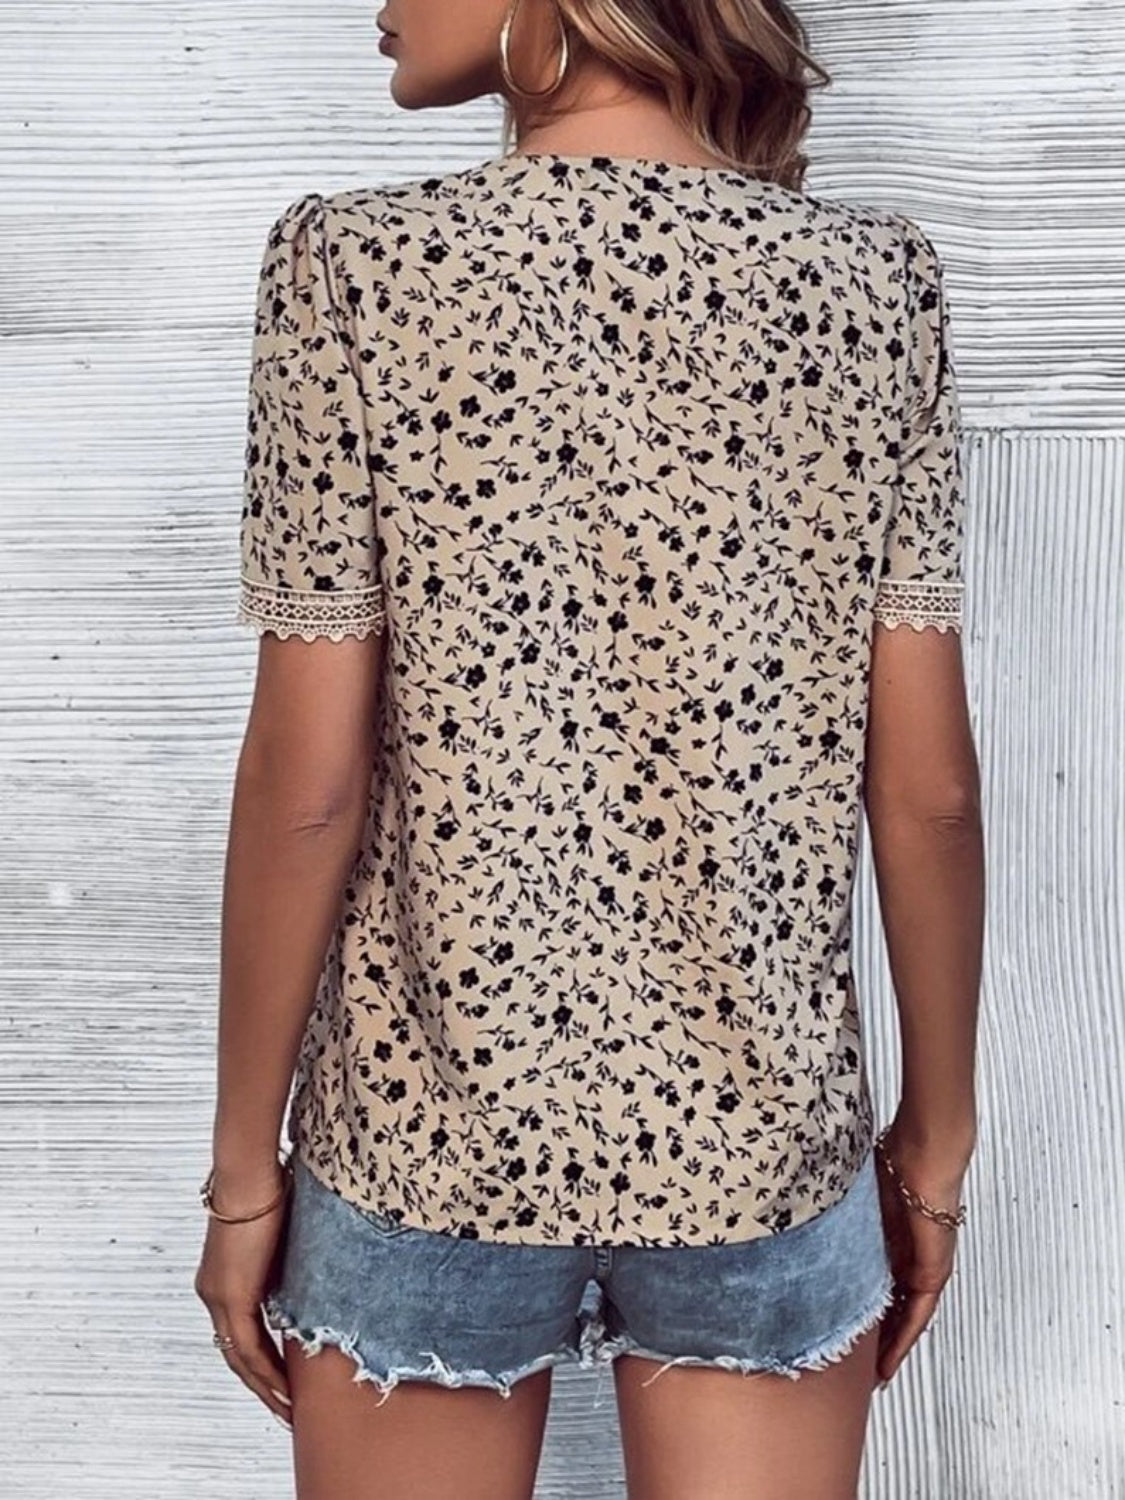 6 The Classy Floral V-Neck Shirt (S - 3X)